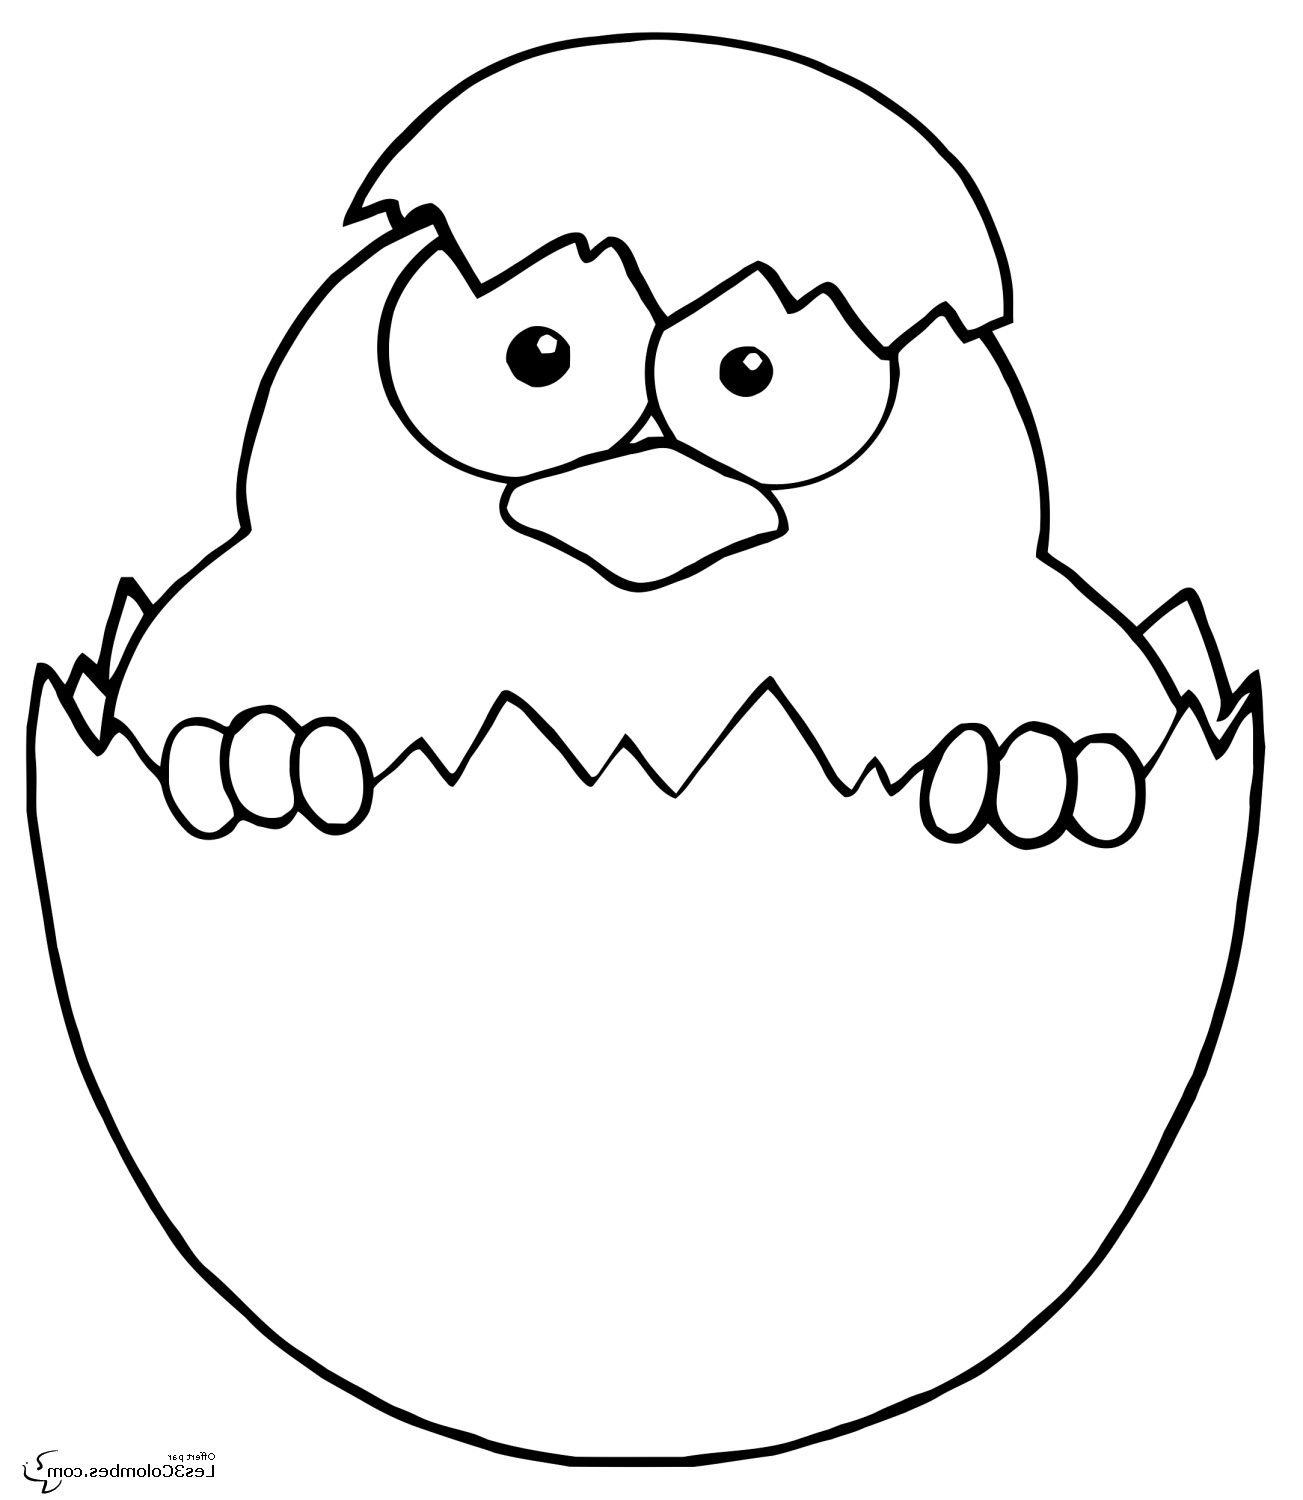 Coloriage Paques Poussin Inspirant Stock Dessin Poussin intérieur Coloriage Poussin 